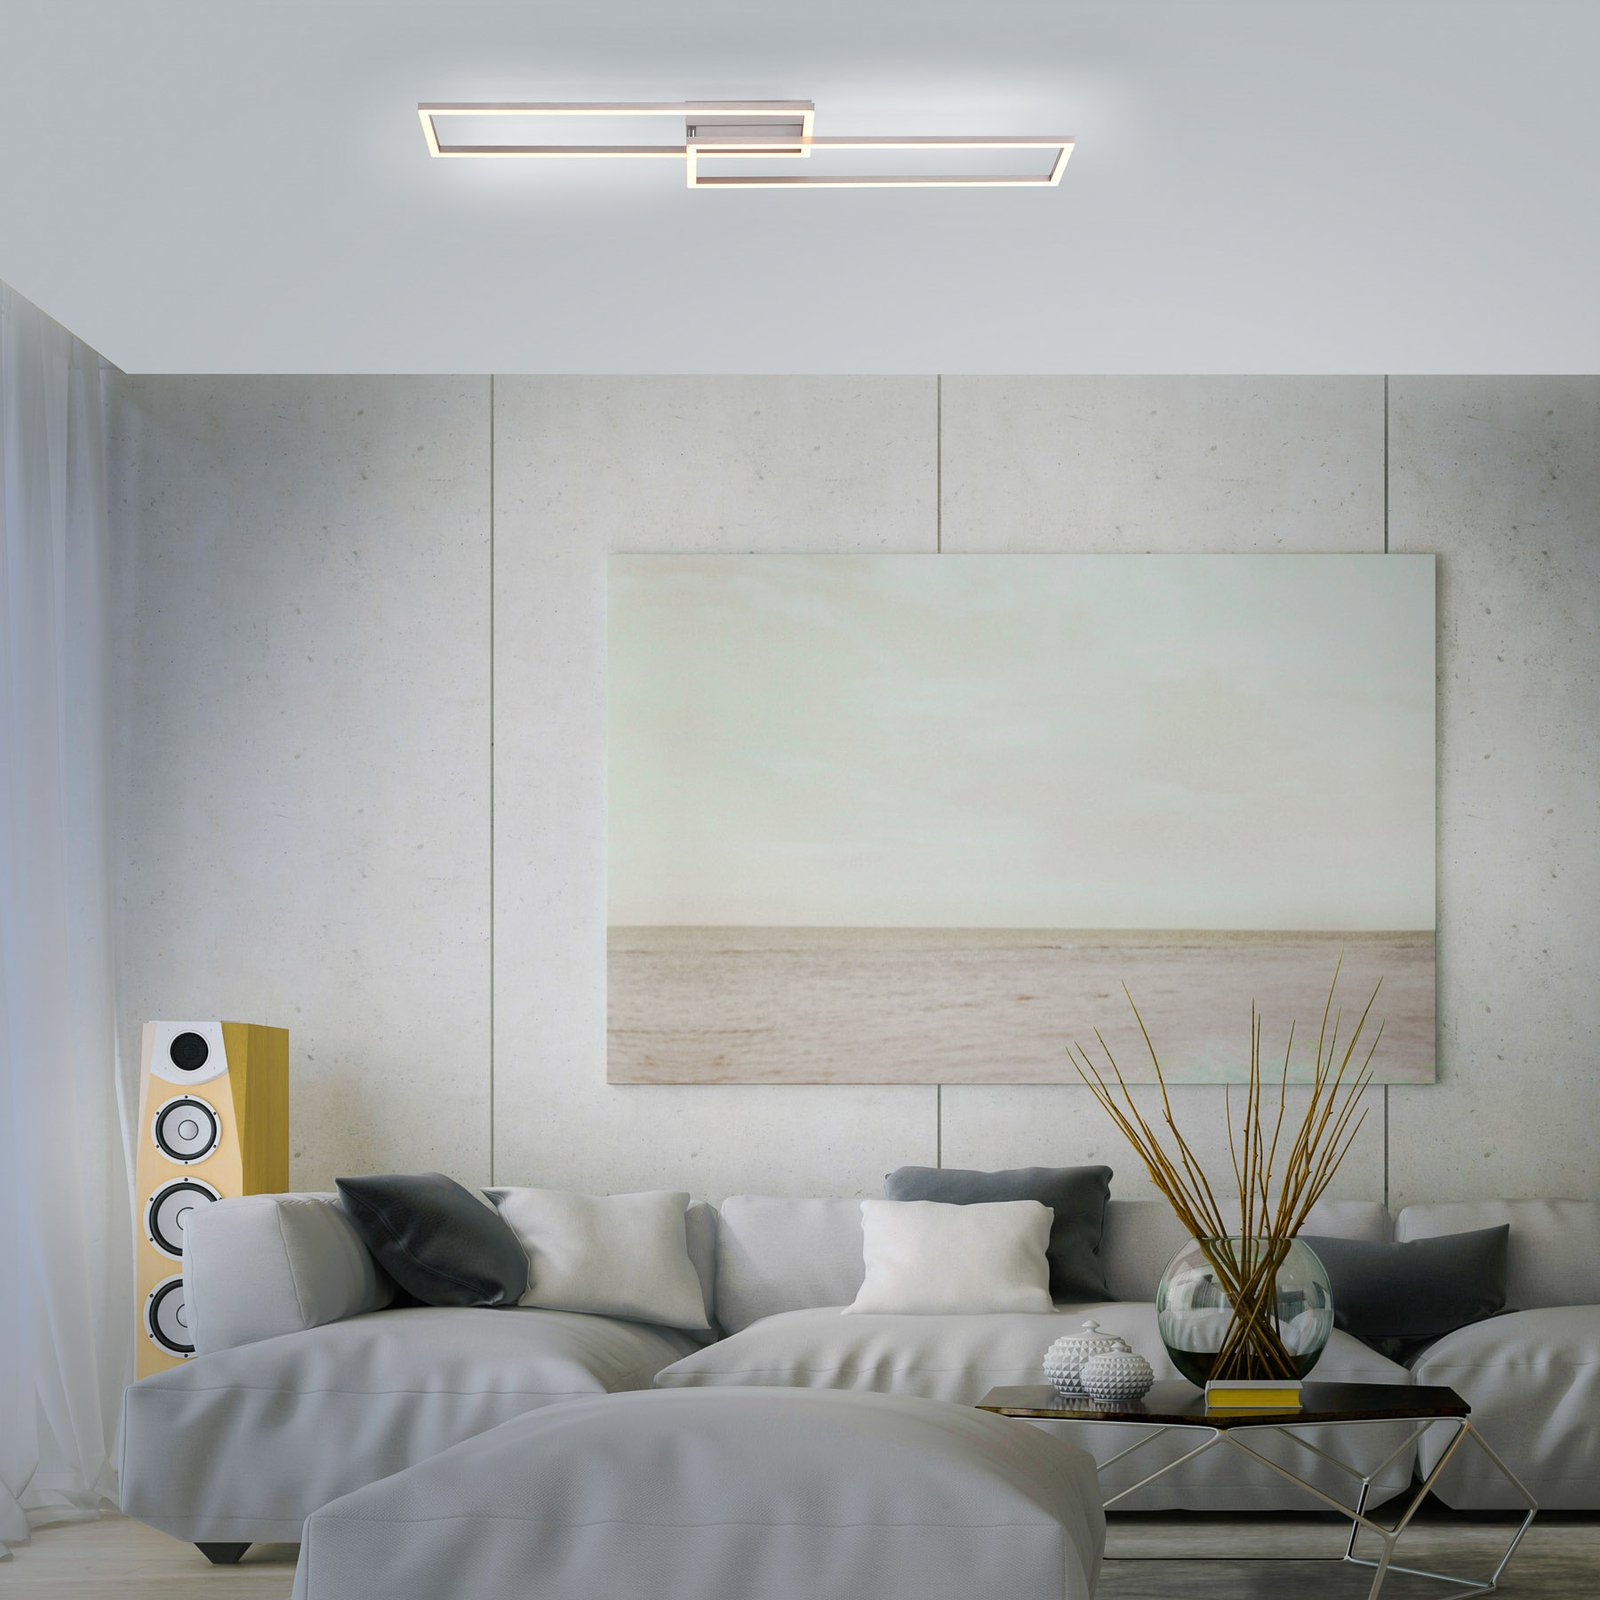 Dime LED ceiling light Iven, dimmable, steel, 92.4x22cm